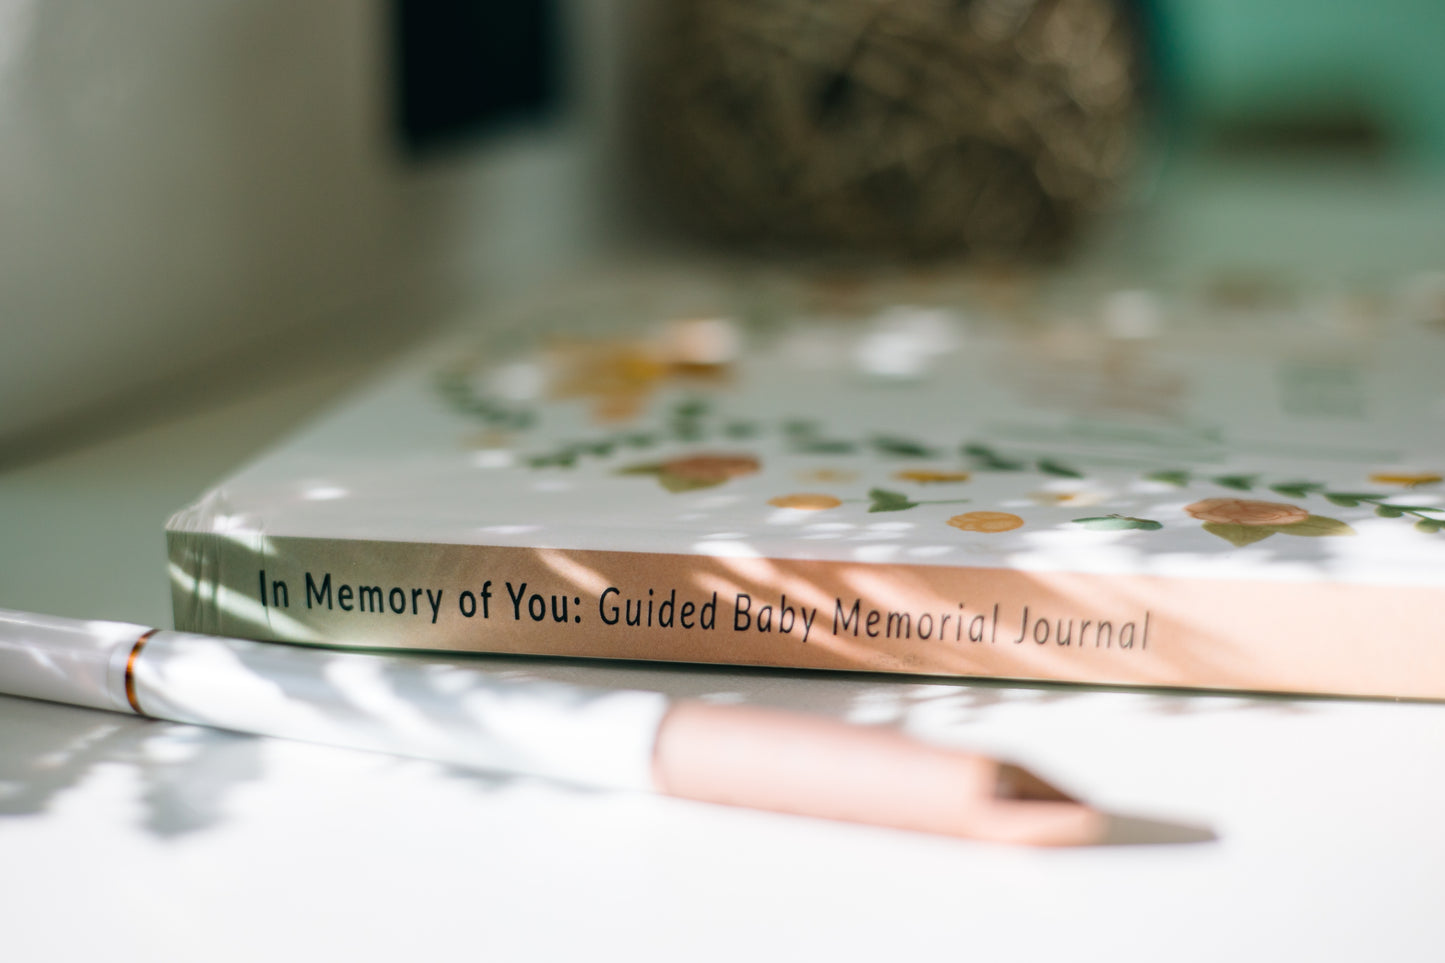 In Memory of You: Guided Baby Memory Journal